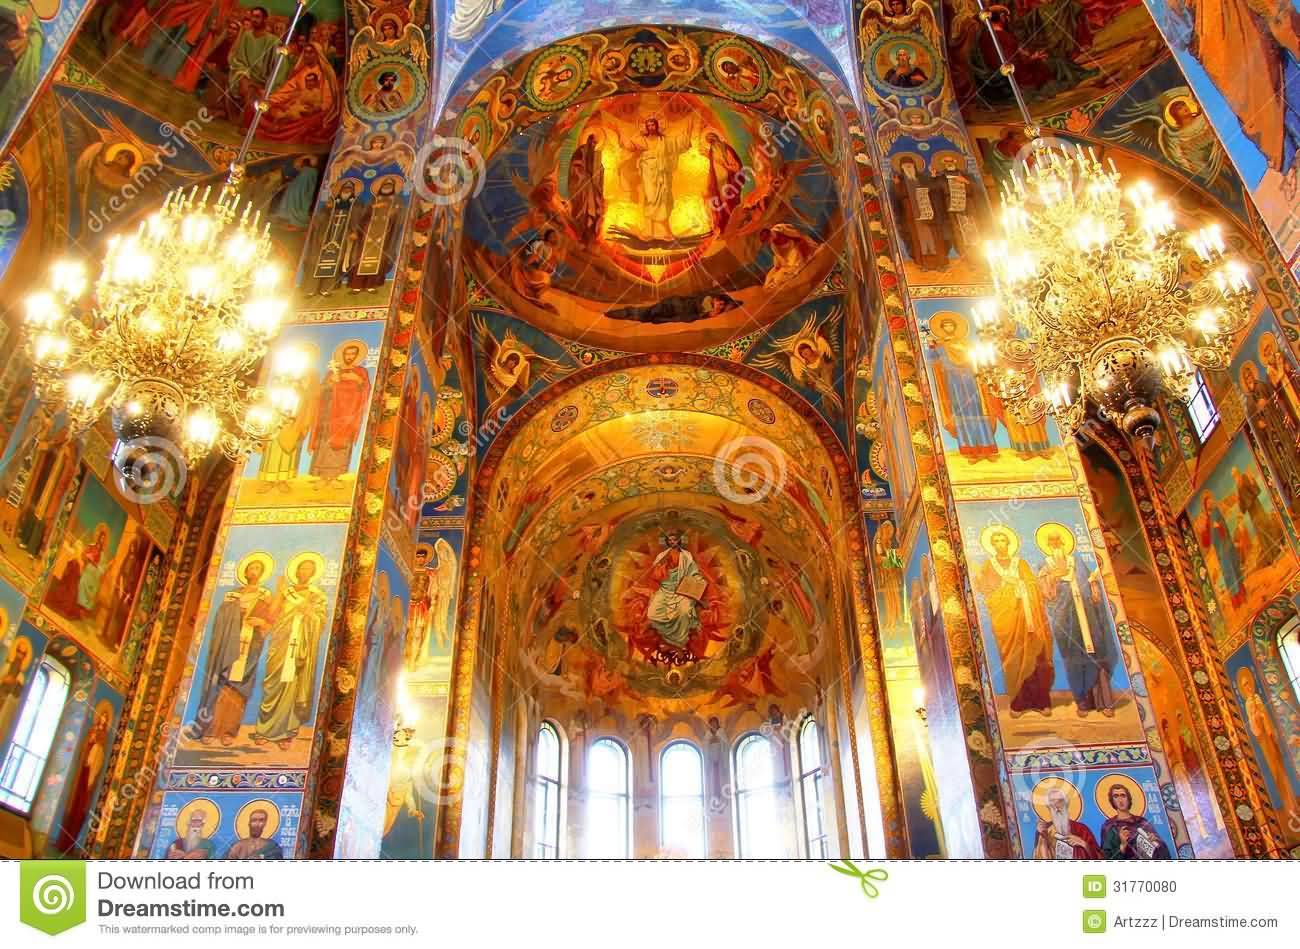 Mosaic Paintings Inside The Church Of The Savior On Blood